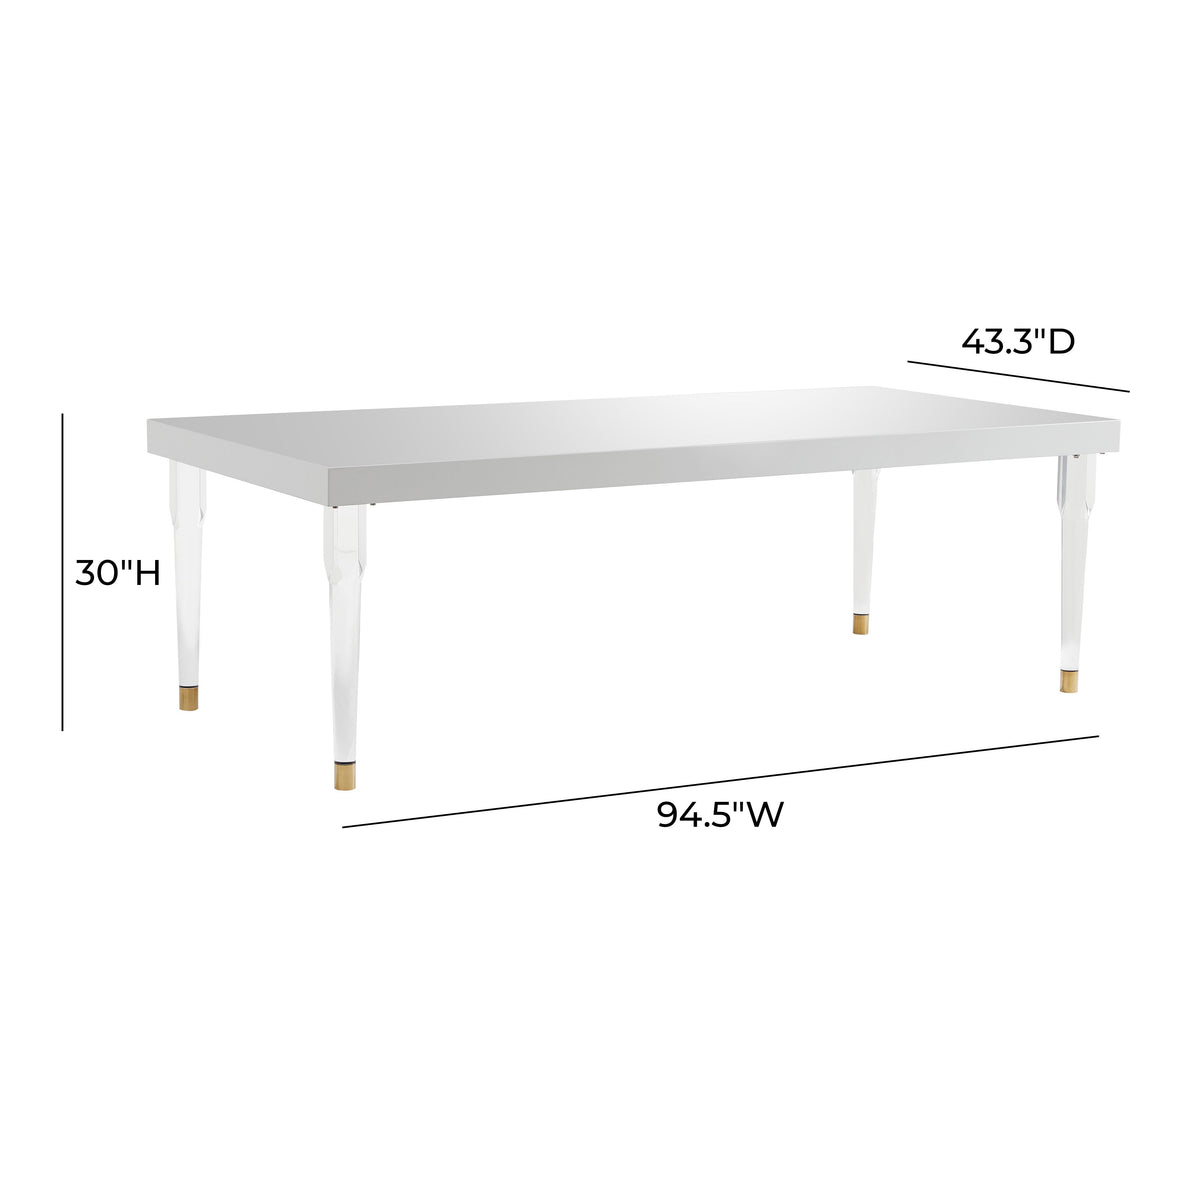 Tabby Glossy Lacquer Dining Table White - Be Bold Furniture